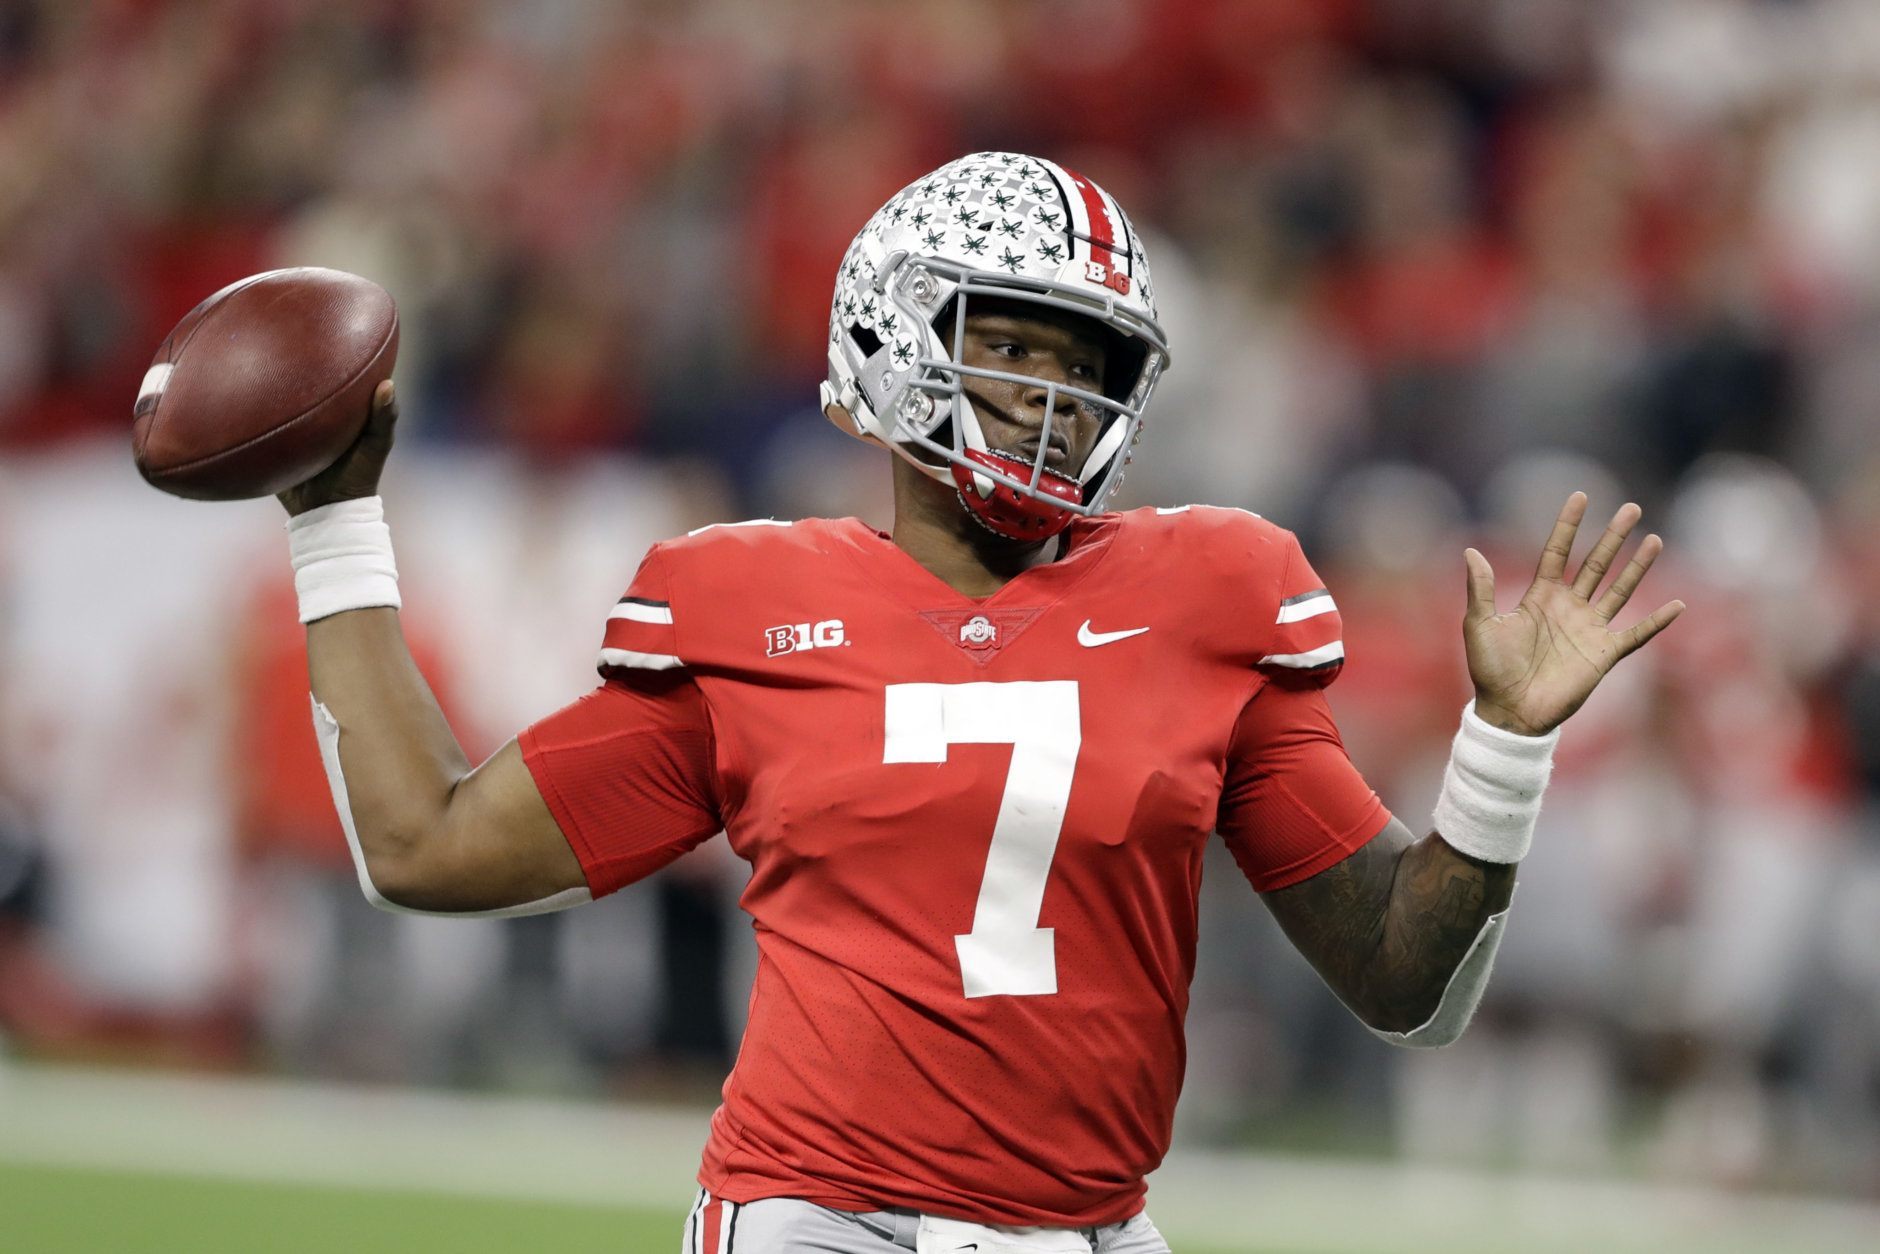 Ohio State quarterback Dwayne Haskins (7) throws during the first half of the Big Ten championship NCAA college football game against Northwestern, Saturday, Dec. 1, 2018, in Indianapolis. (AP Photo/Darron Cummings)